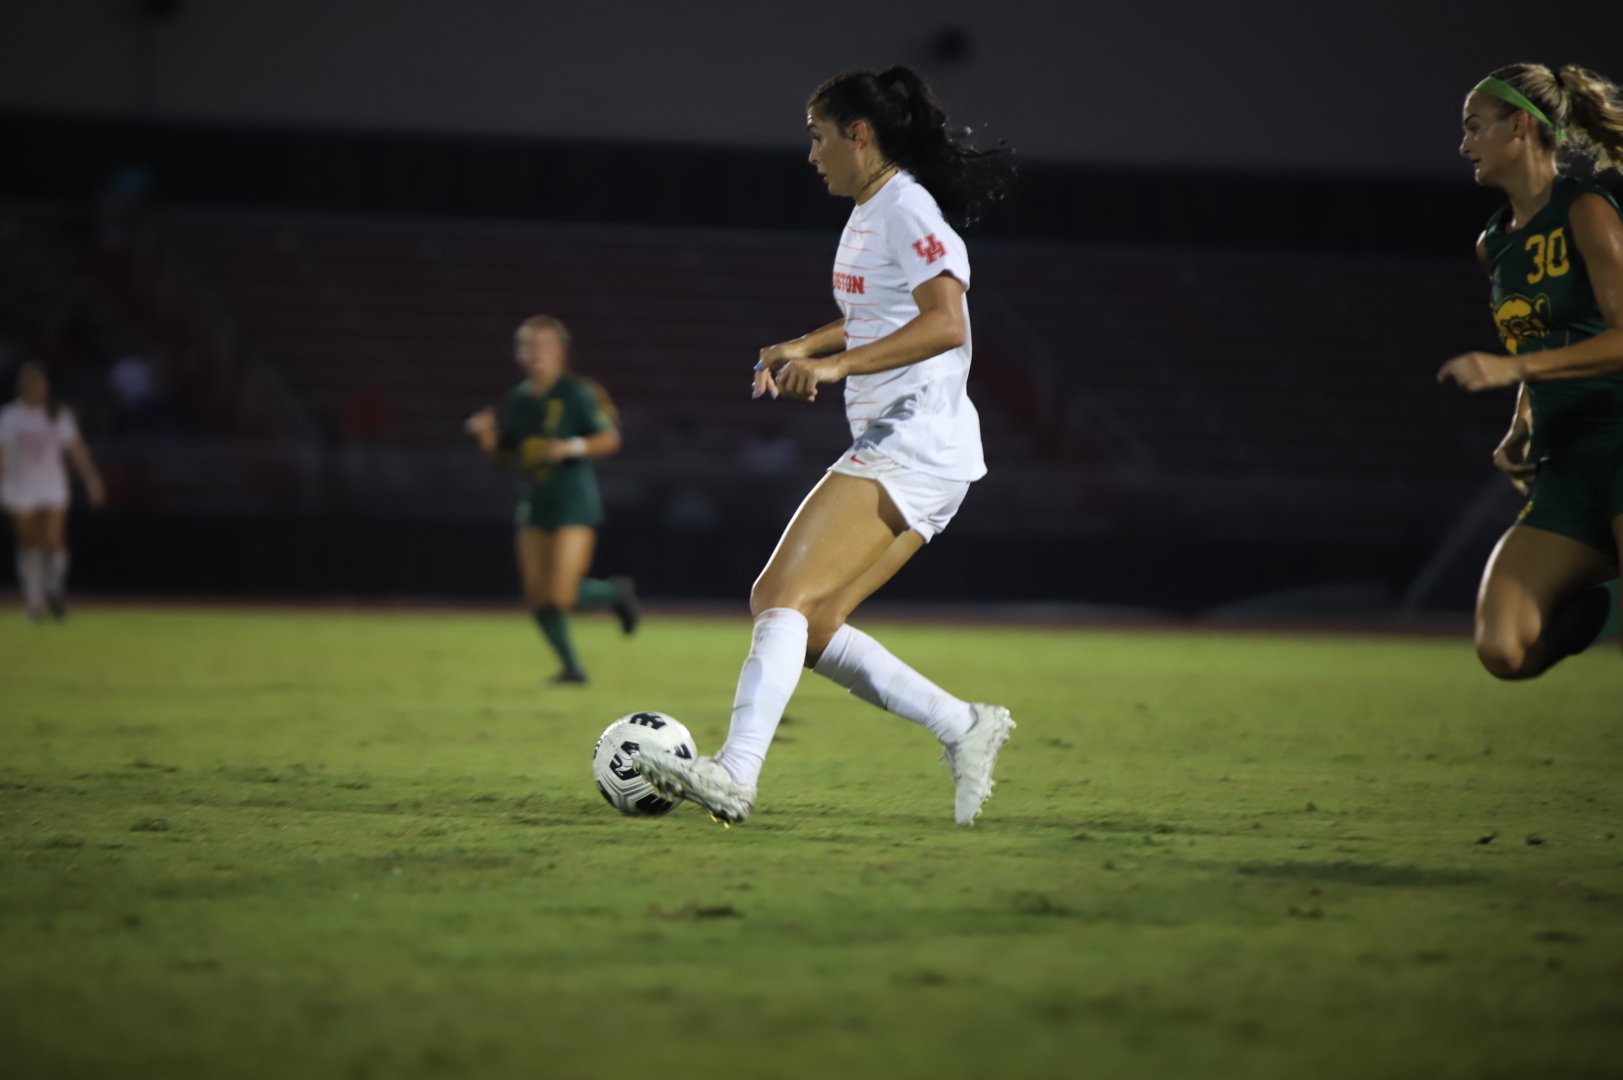 UH soccer suffered its first loss in AAC play at the hands of East Carolina on Thursday night. | Anh Le/The Cougar